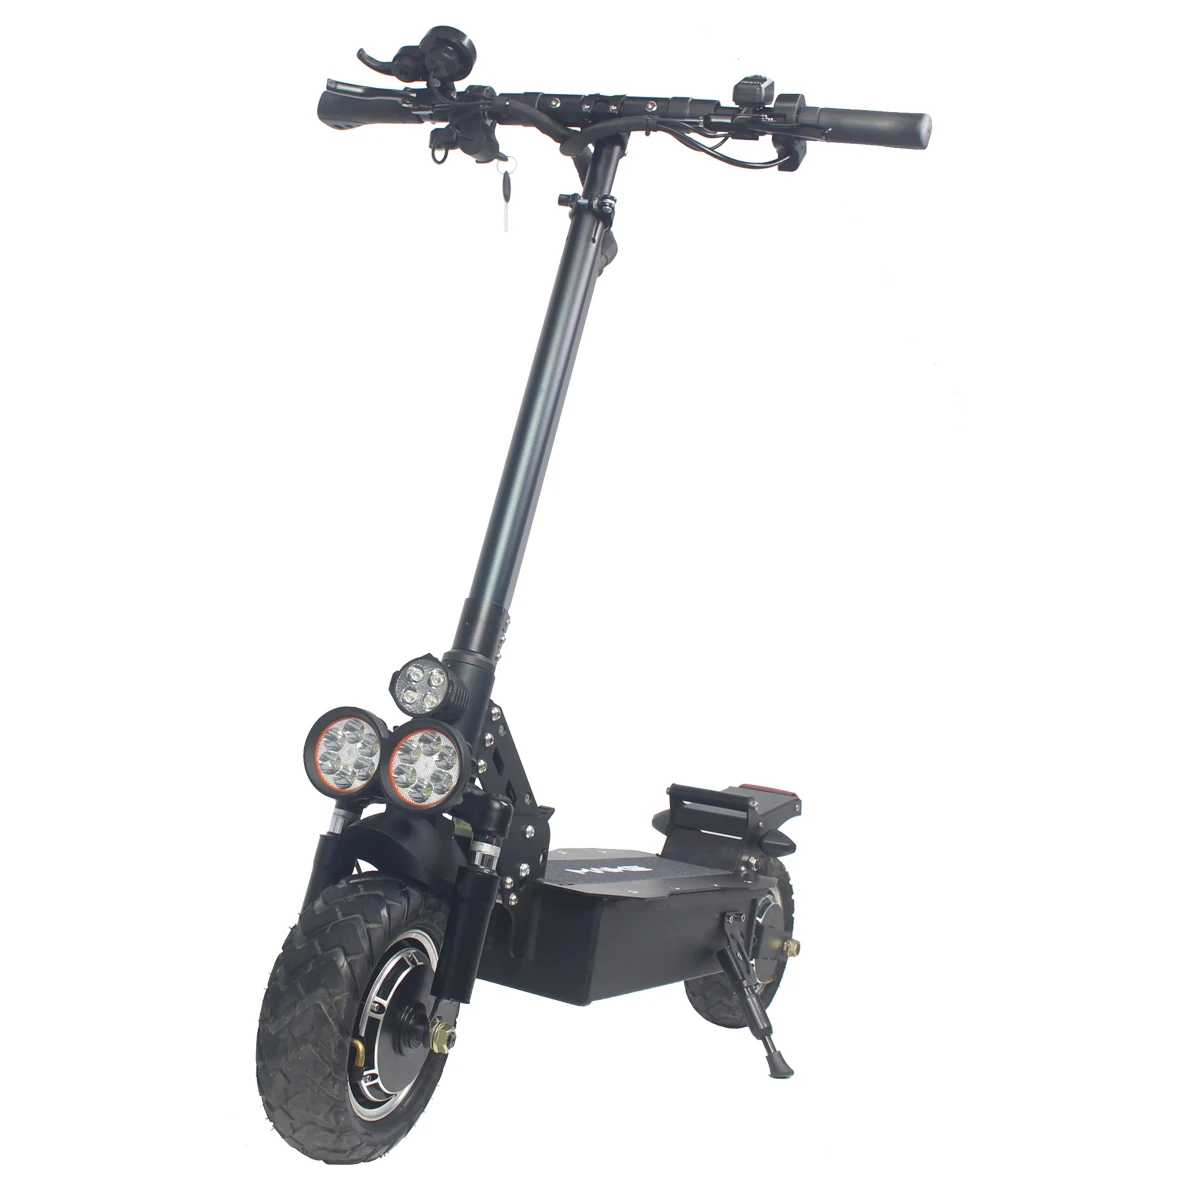 

Hot Sale Factory Direct Supplier maike mk6 1000w 2000w dual hub motor e scooter off road power electric scooter for adults